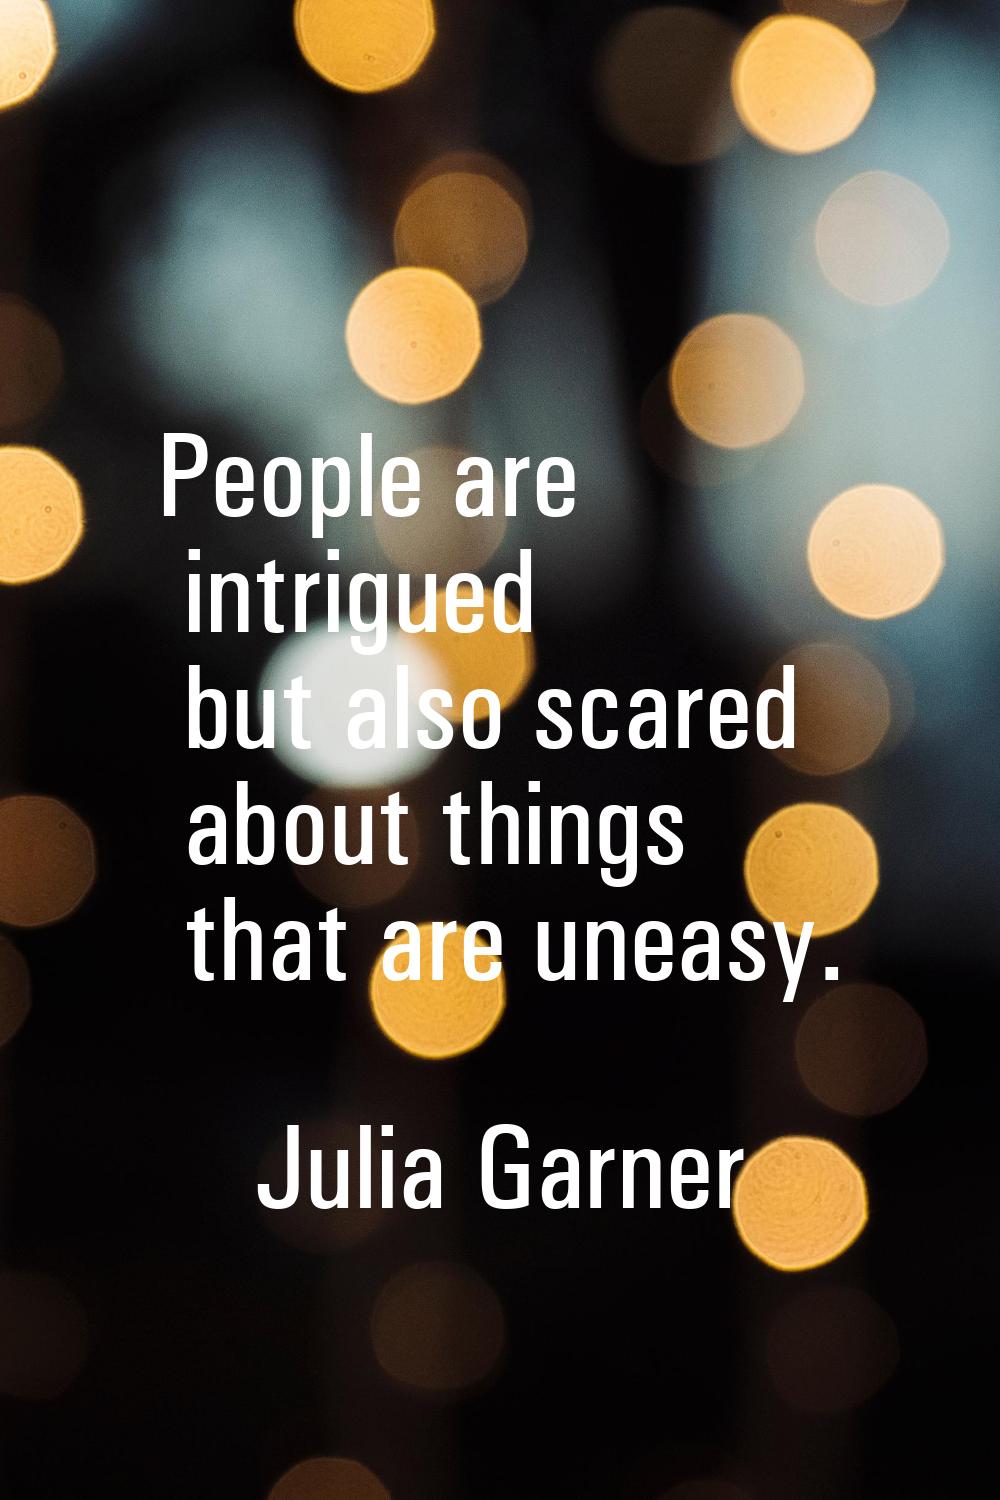 People are intrigued but also scared about things that are uneasy.